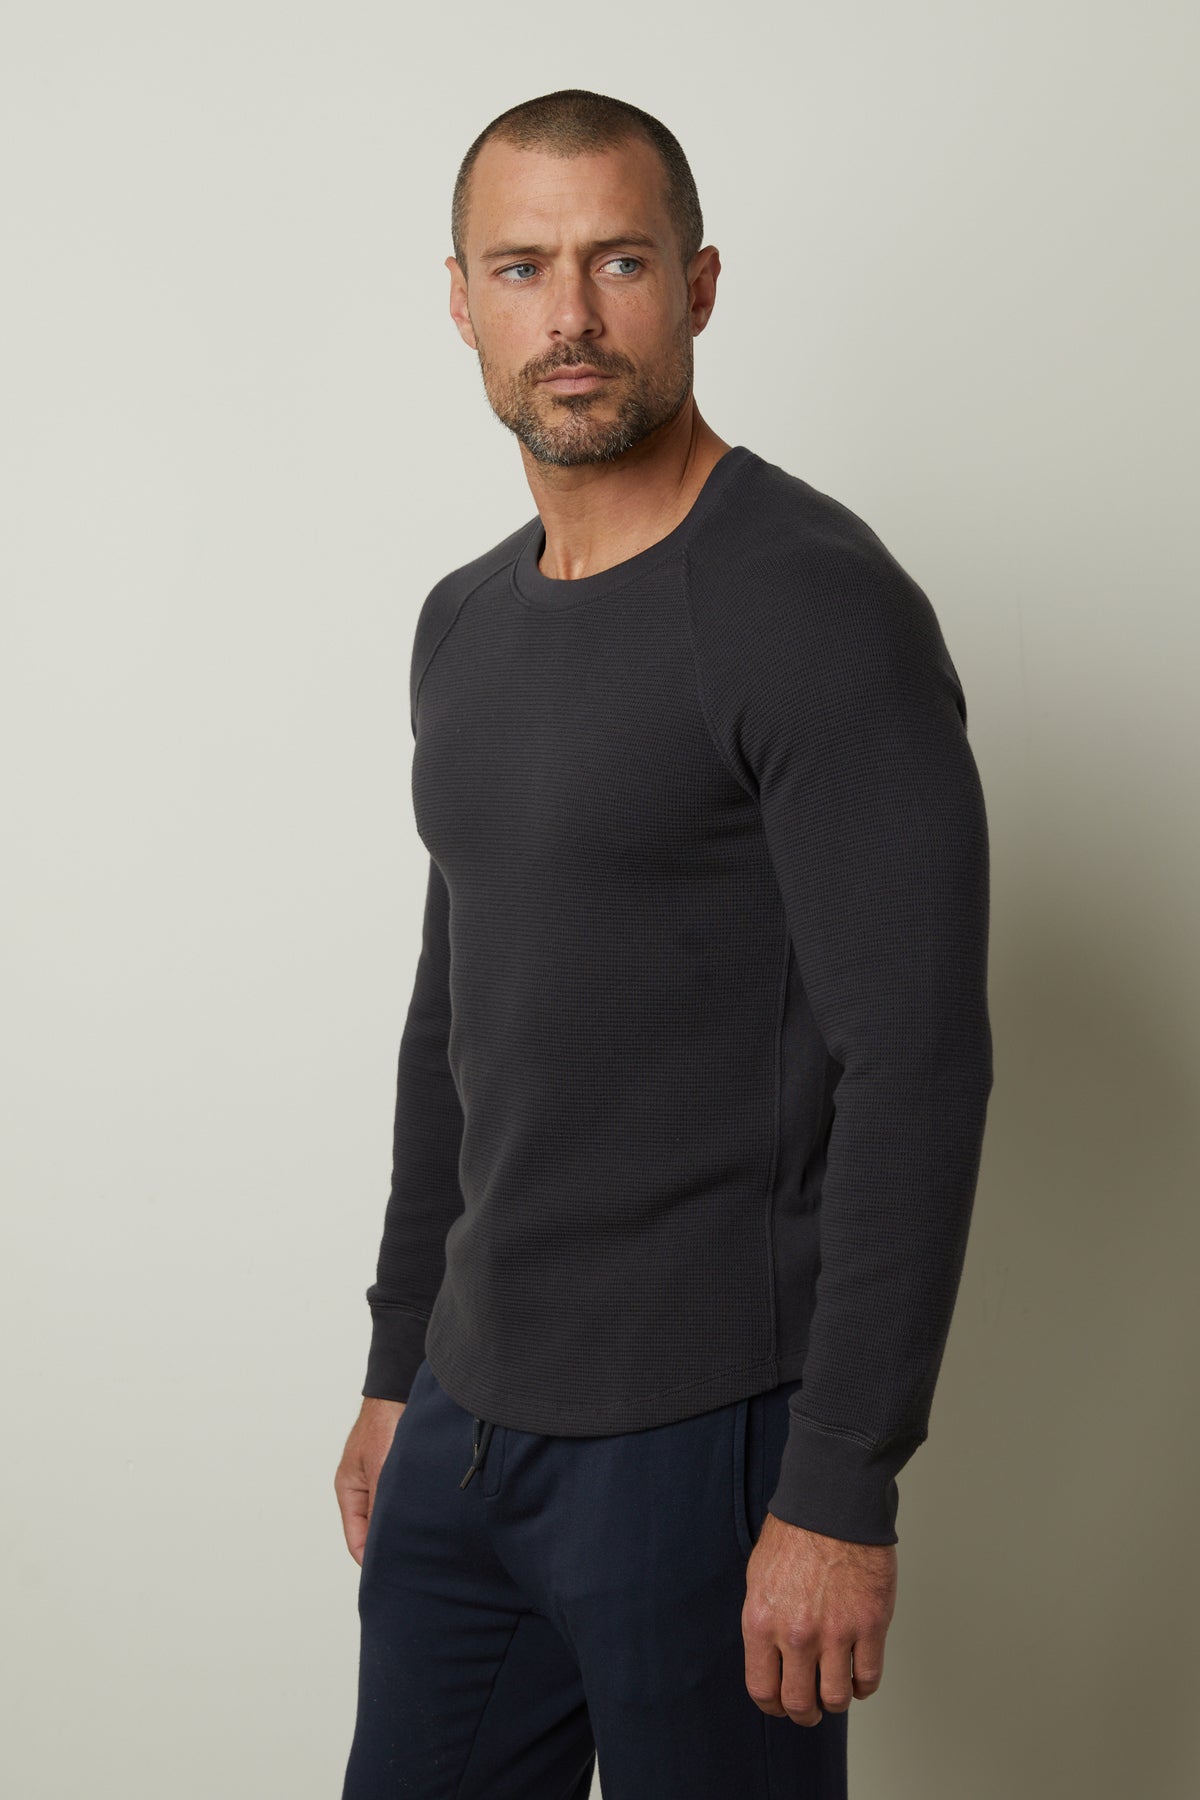 A man wearing a Velvet by Graham & Spencer GLEN THERMAL CREW sweatshirt with a comfortable fit.-35231540216001